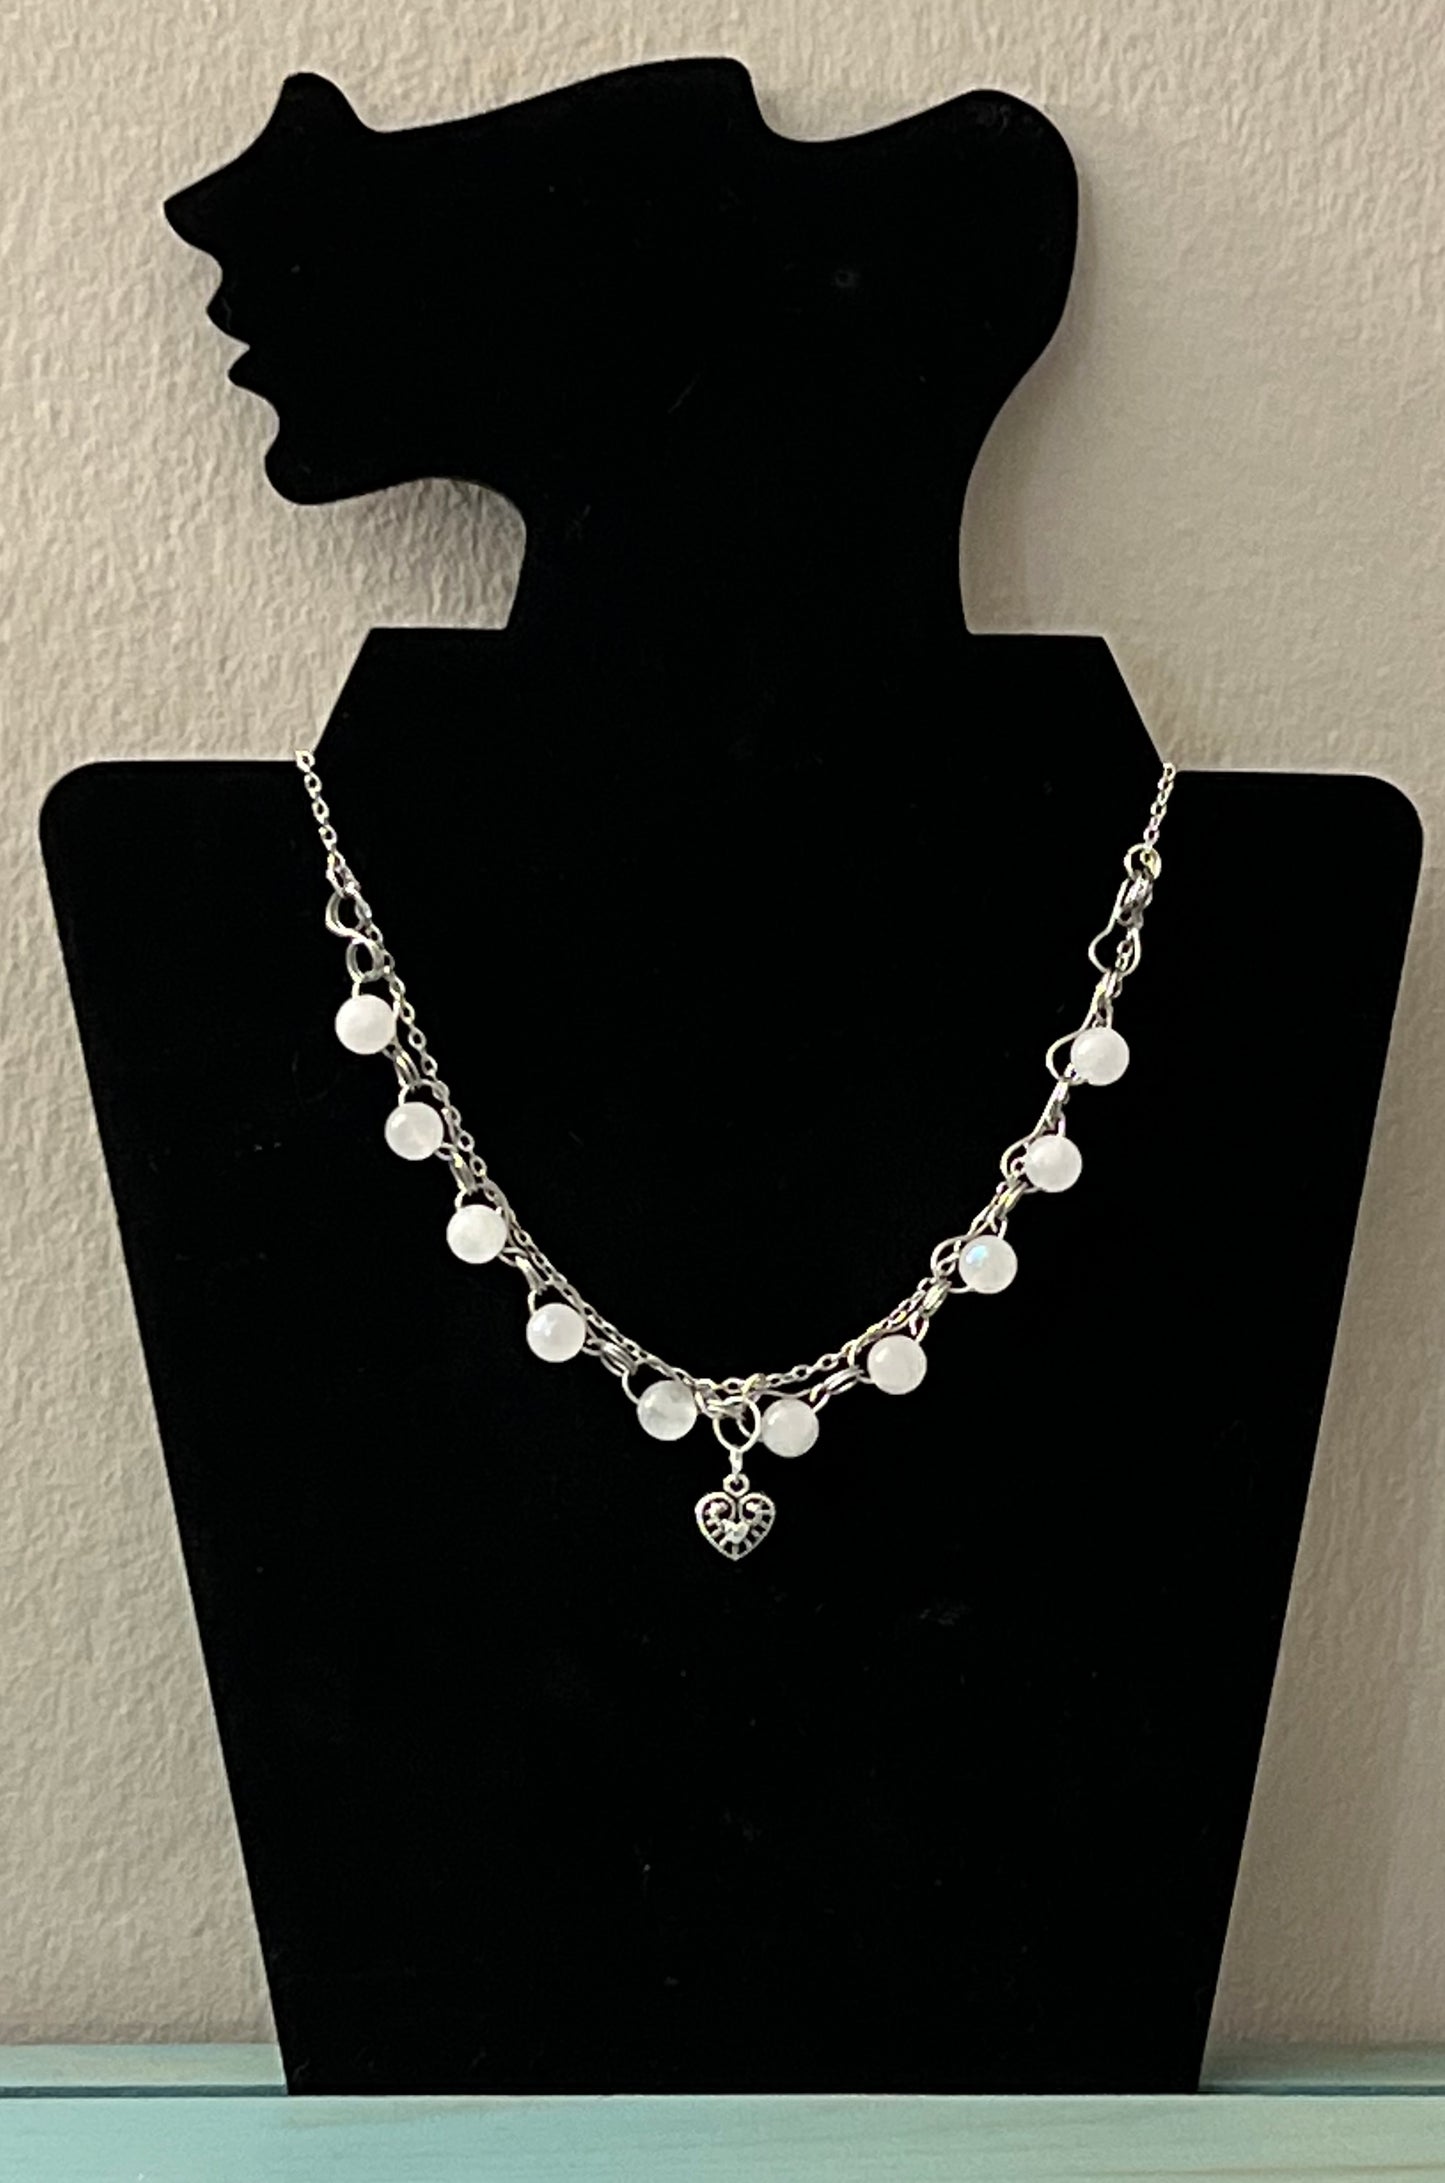 Enchantress Moonstone Necklace and Earrings